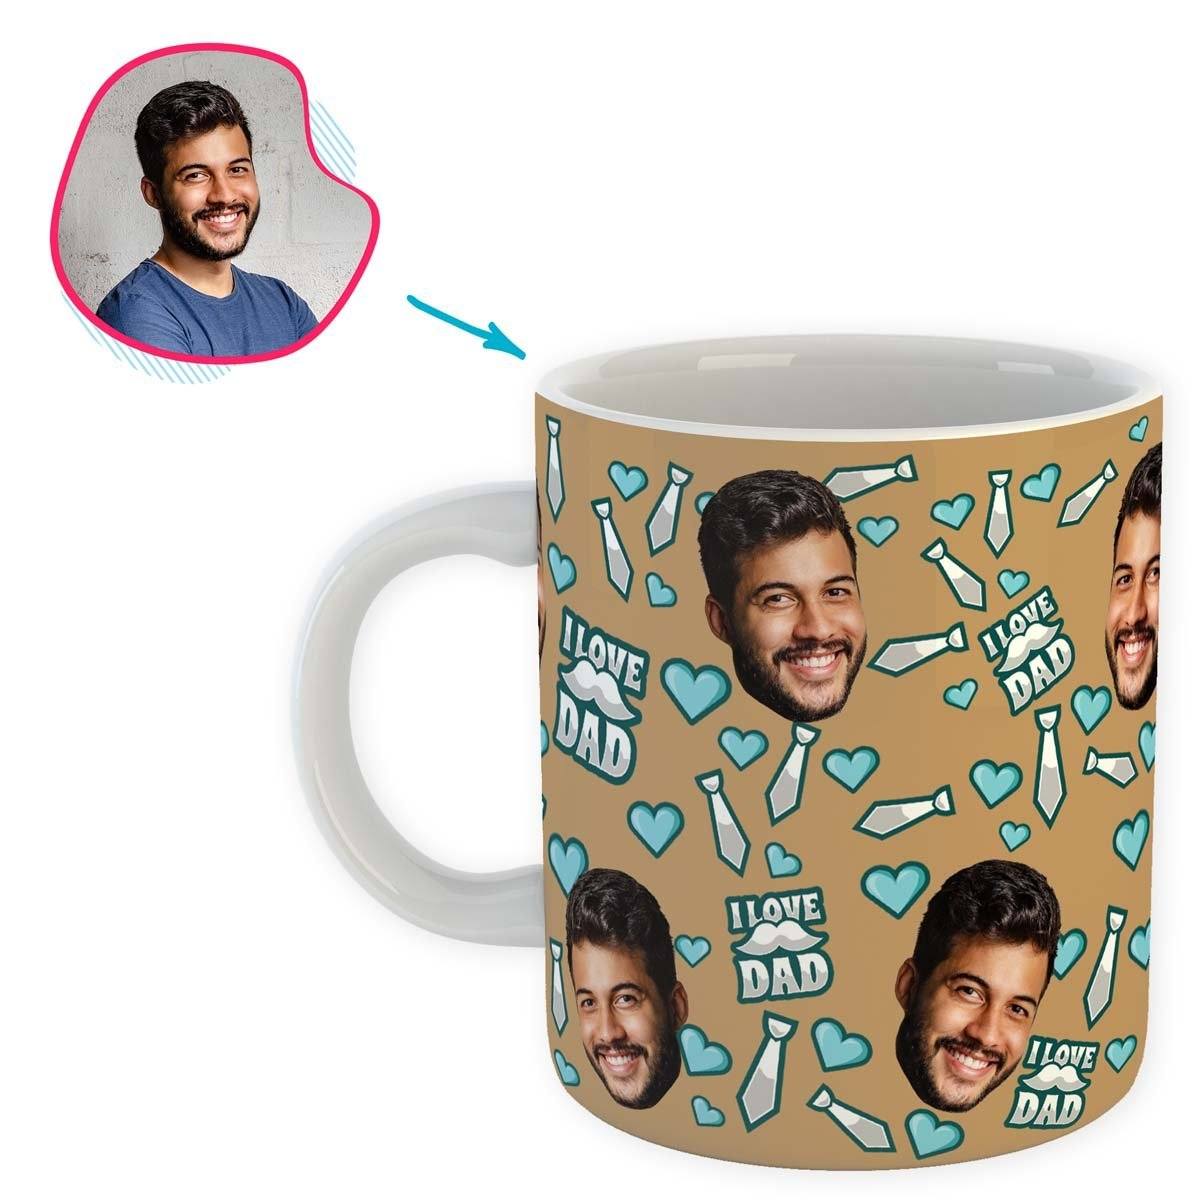 brown Love Dad mug personalized with photo of face printed on it